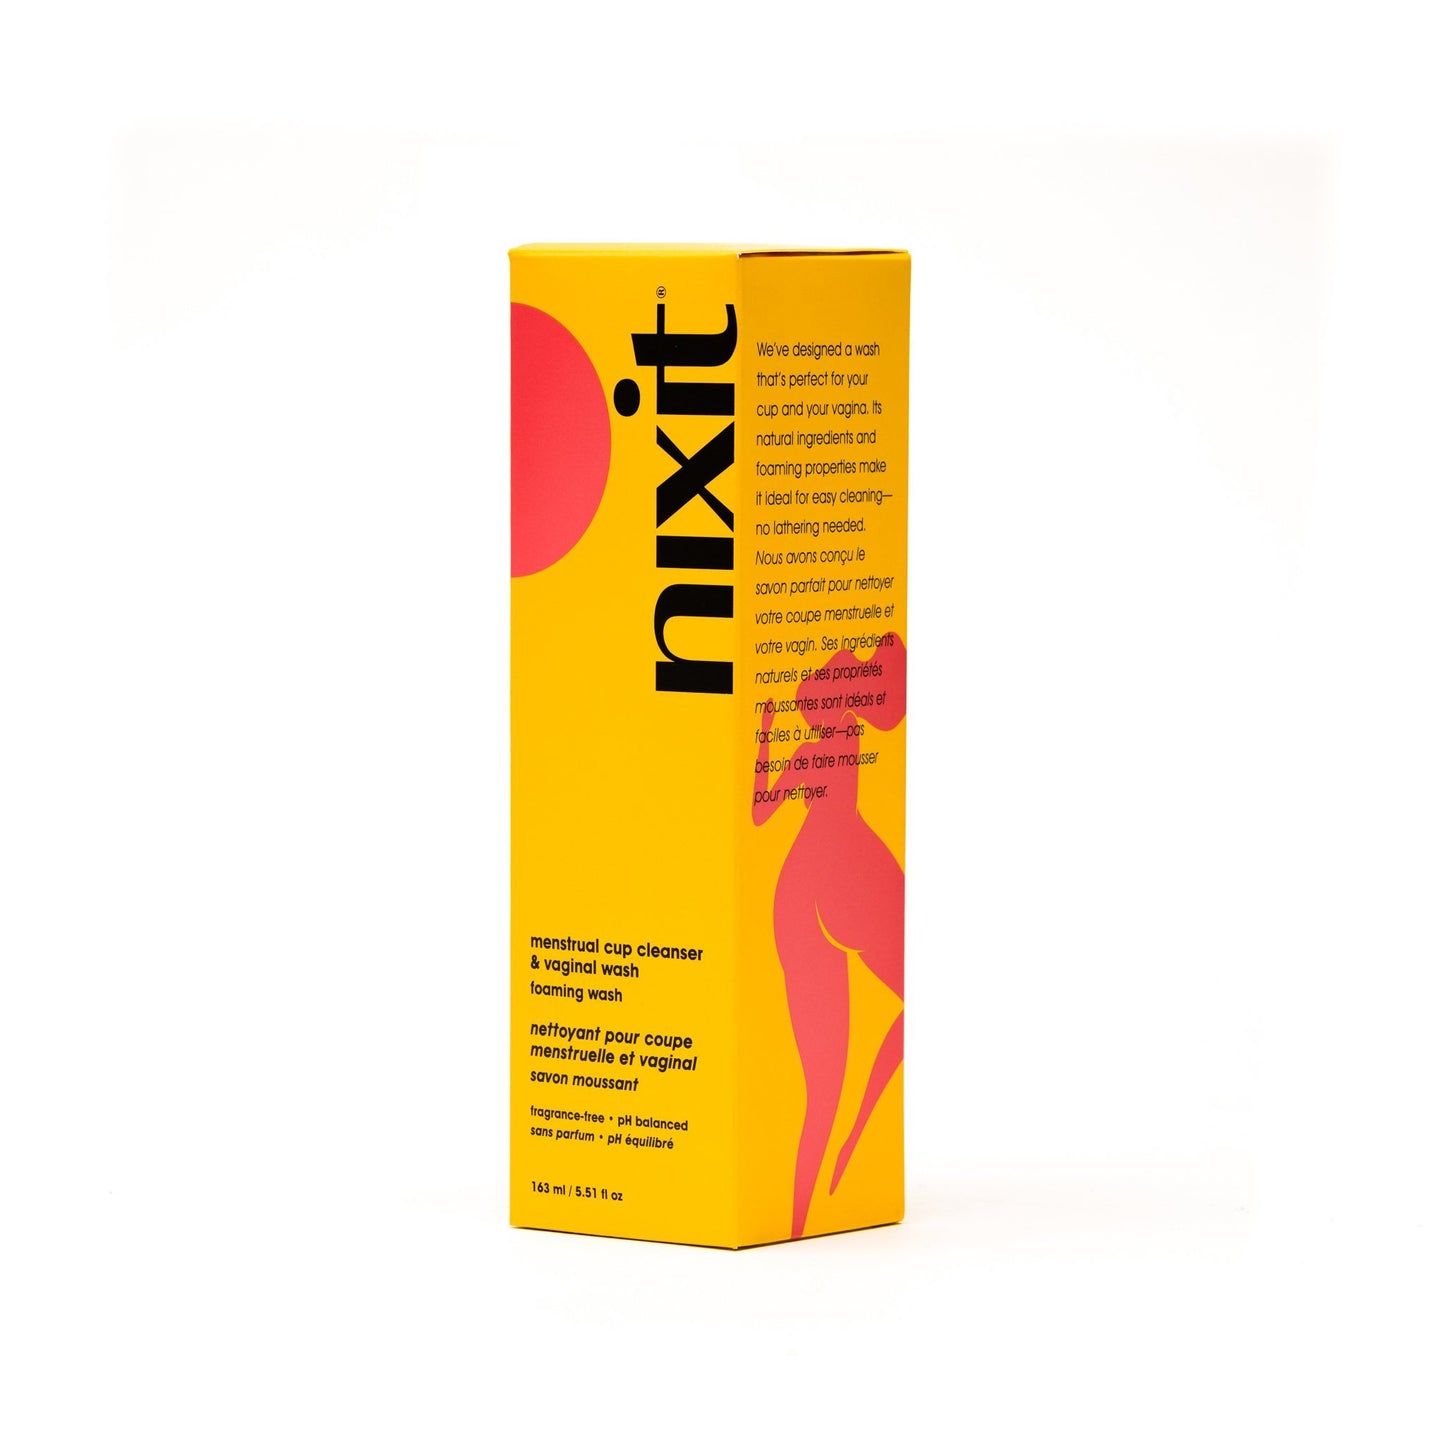 Product photo of nixit menstrual cup cleanser and vaginal wash inside product box